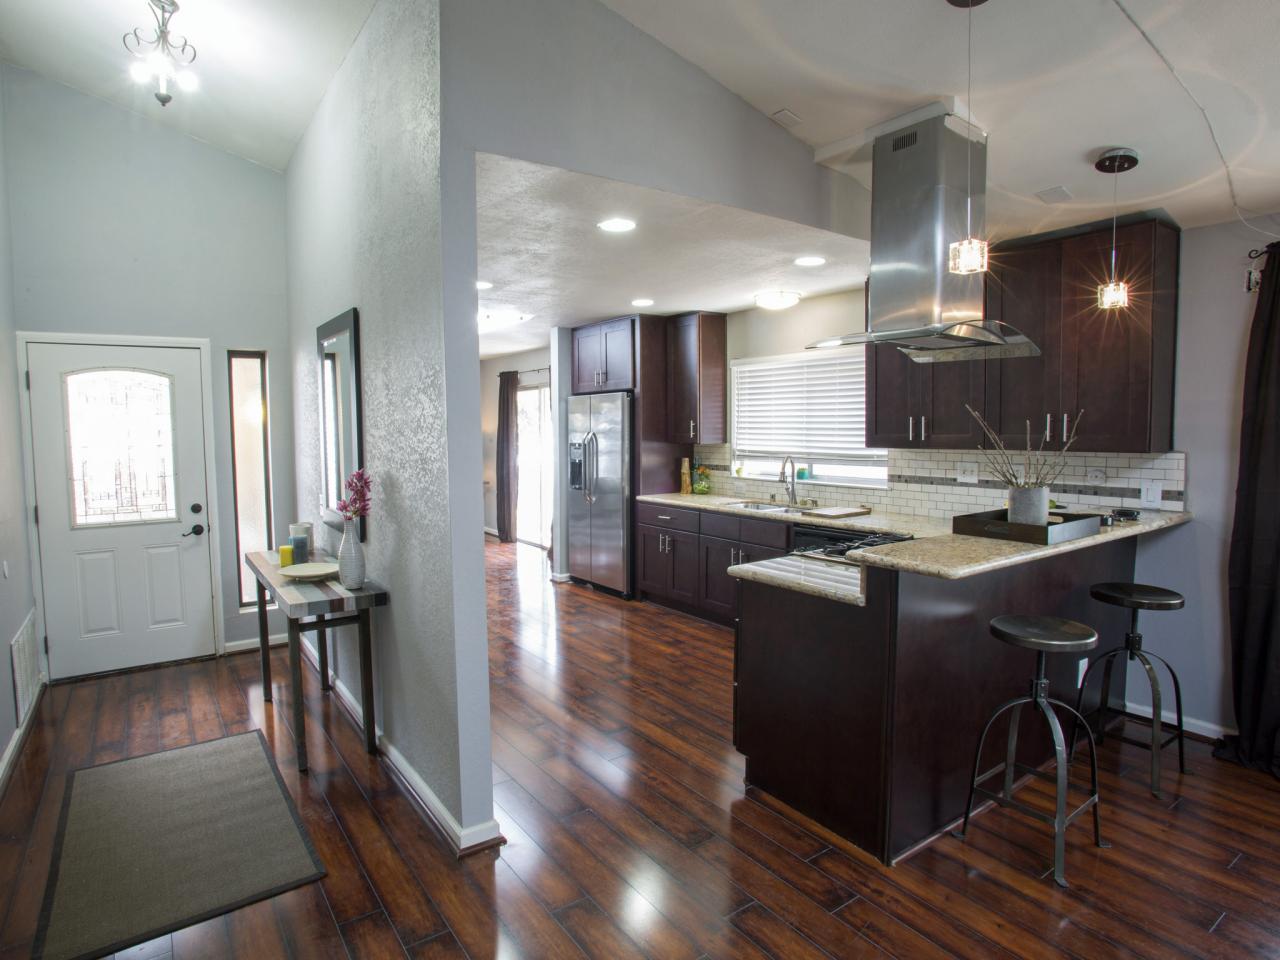 The Pros And Cons Of Laminate Flooring, How To Protect Kitchen Hardwood Floors